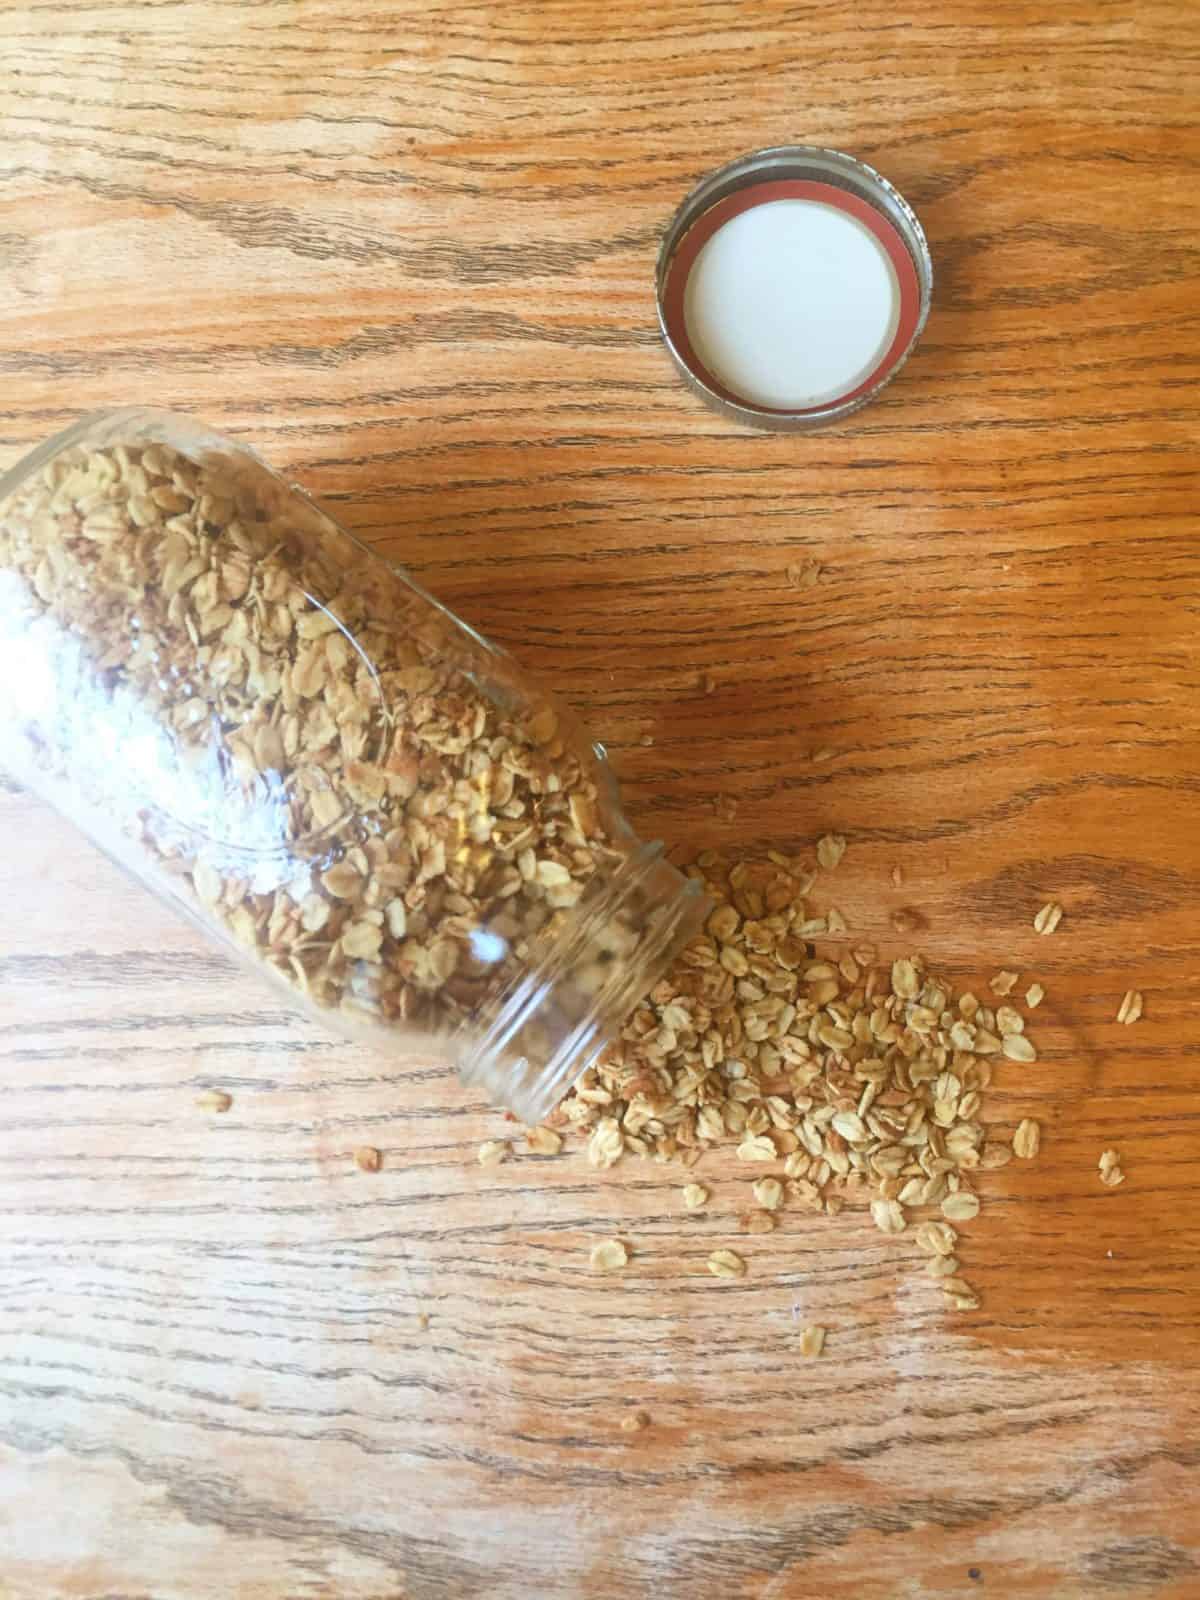 Granola spilled across a table.